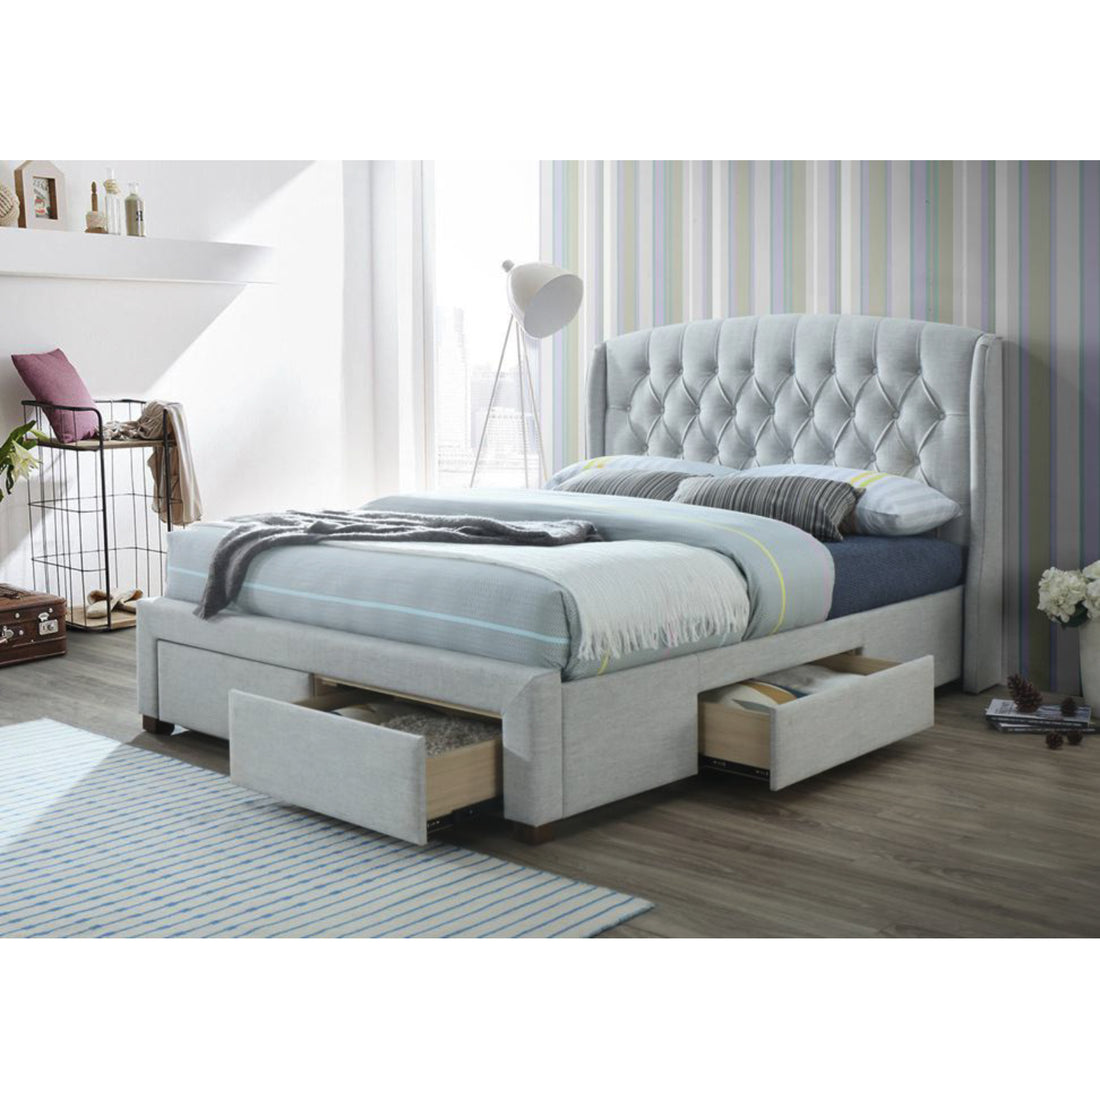 Honeydew King Size Bed Frame Timber Mattress Base With Storage Drawers - Beige